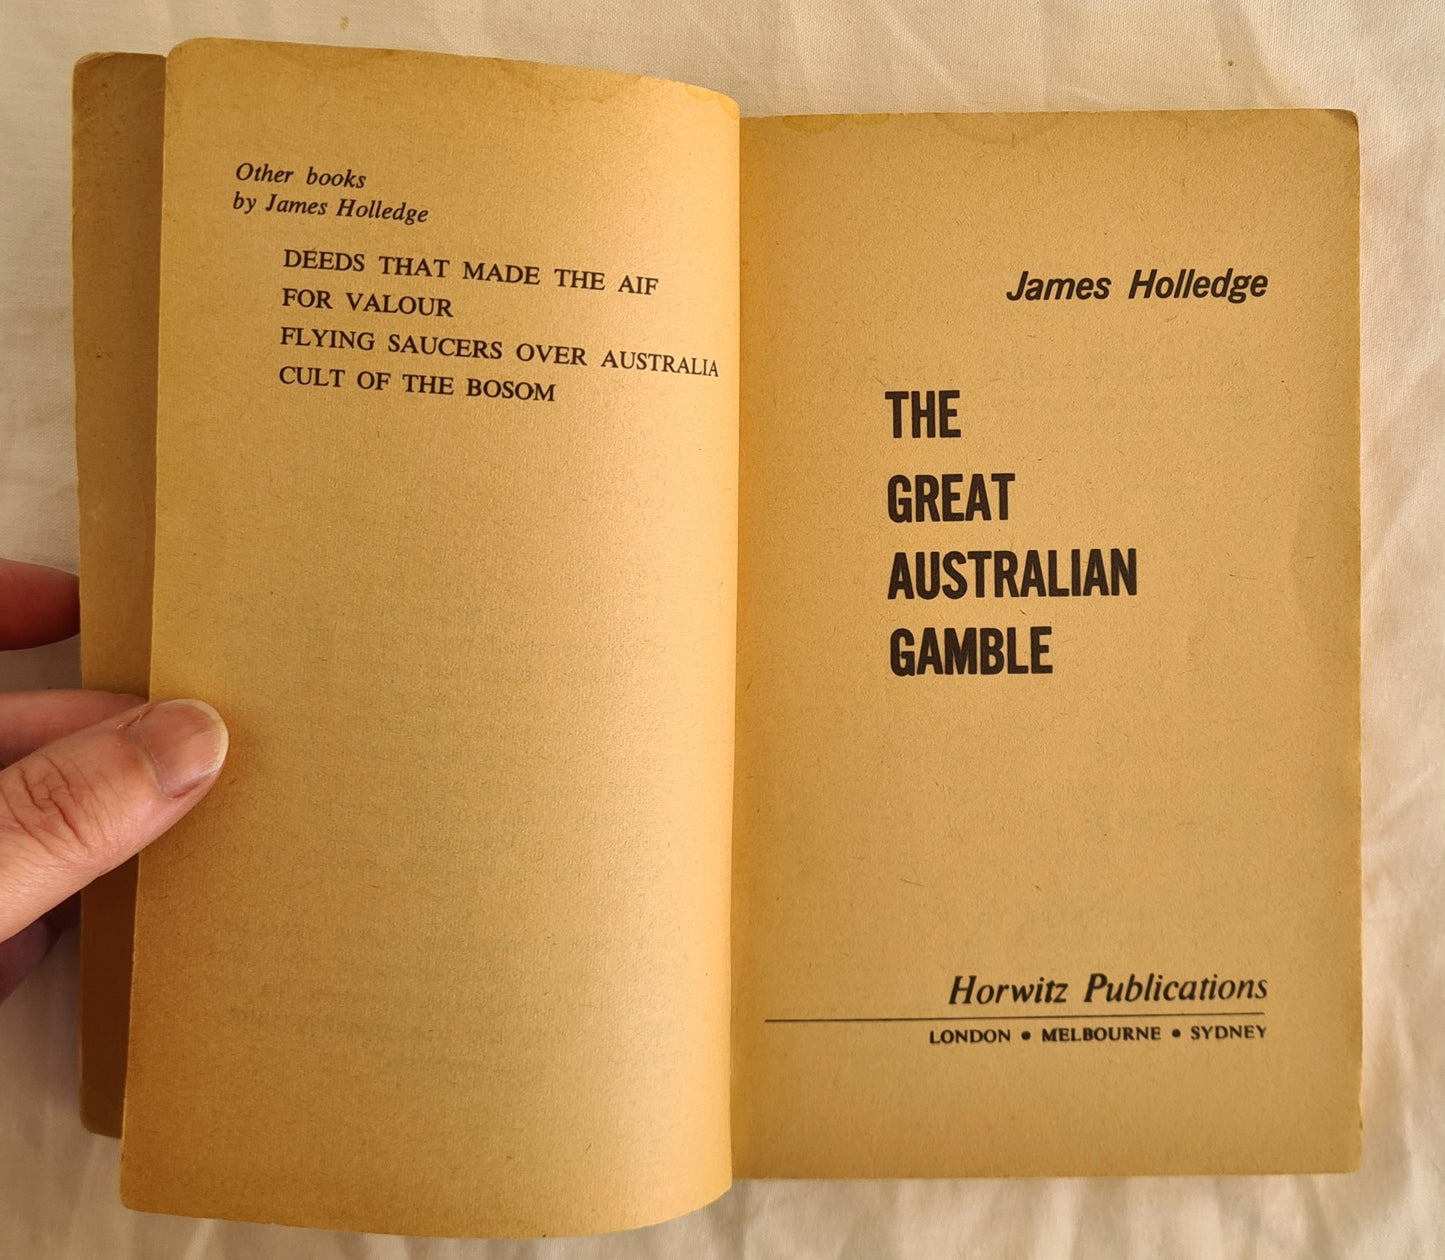 The Great Australian Gamble by James Holledge